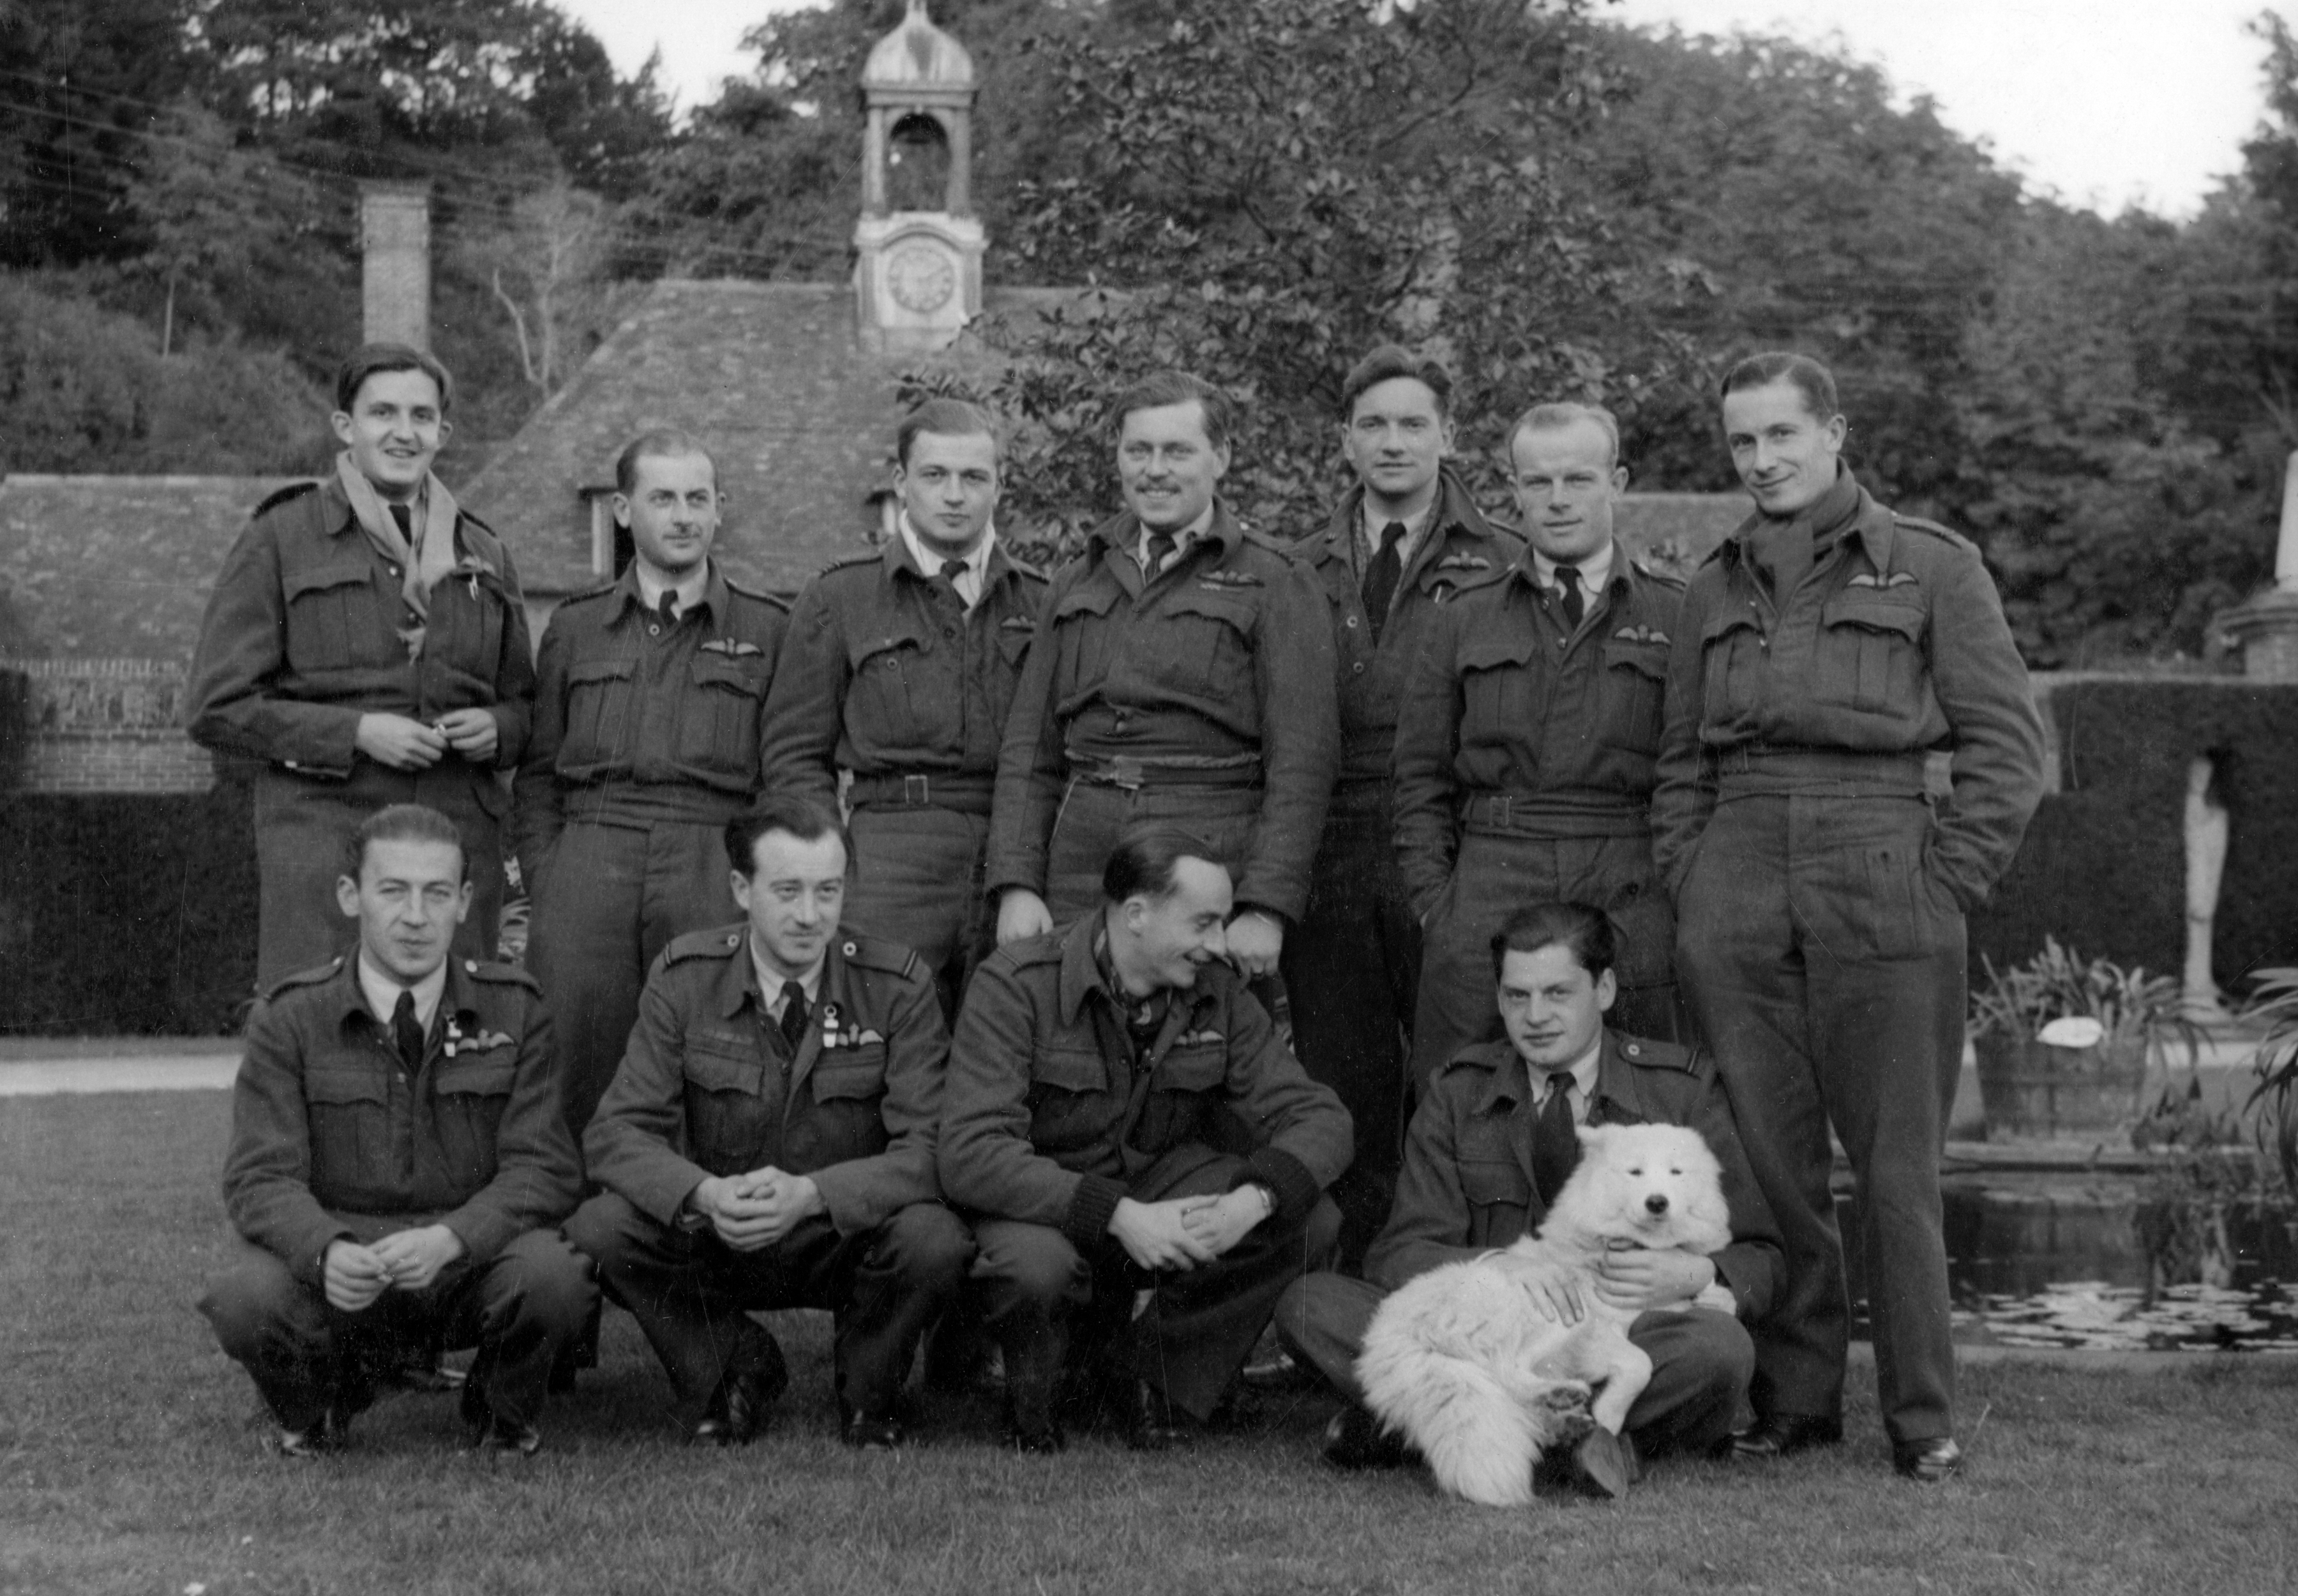 Group photo of Squadron with the dog mascot.